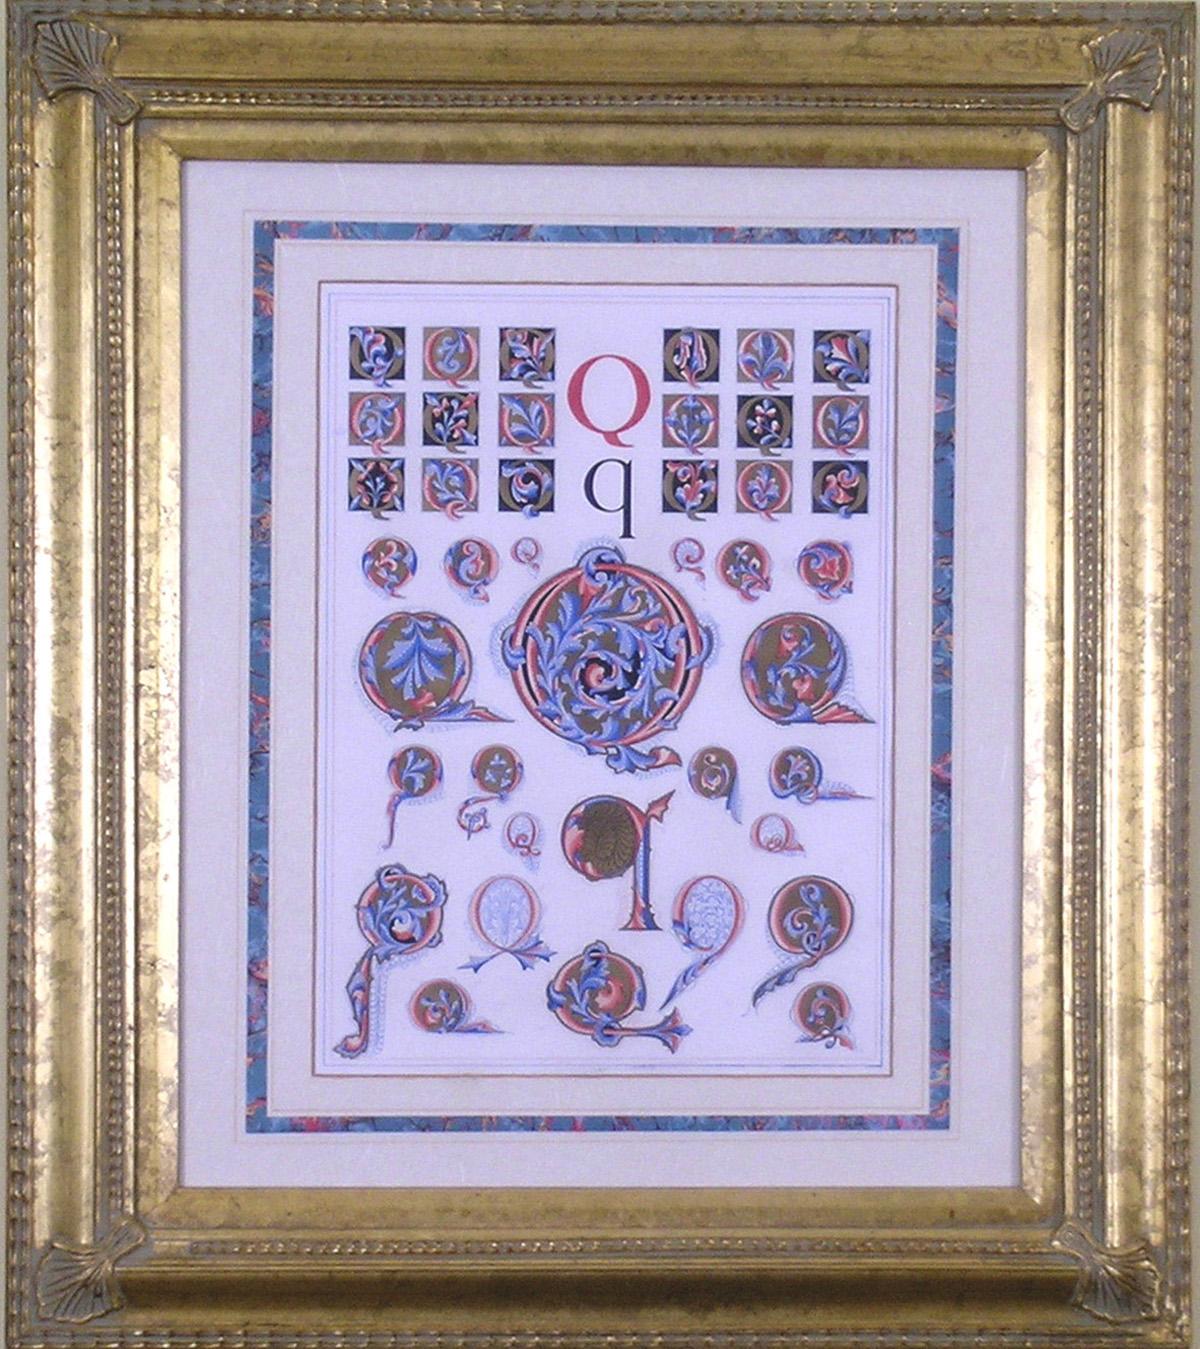 ONE THOUSAND AND ONE INITIAL LETTERS
Owen Jones (1806-1889)
Day & Sons
London, 1864
Chromolithographs  

	One Thousand and One Initial Letters playfully describes an artistic endeavor by Owen Jones.  Teaching Applied Arts at the South Kensington